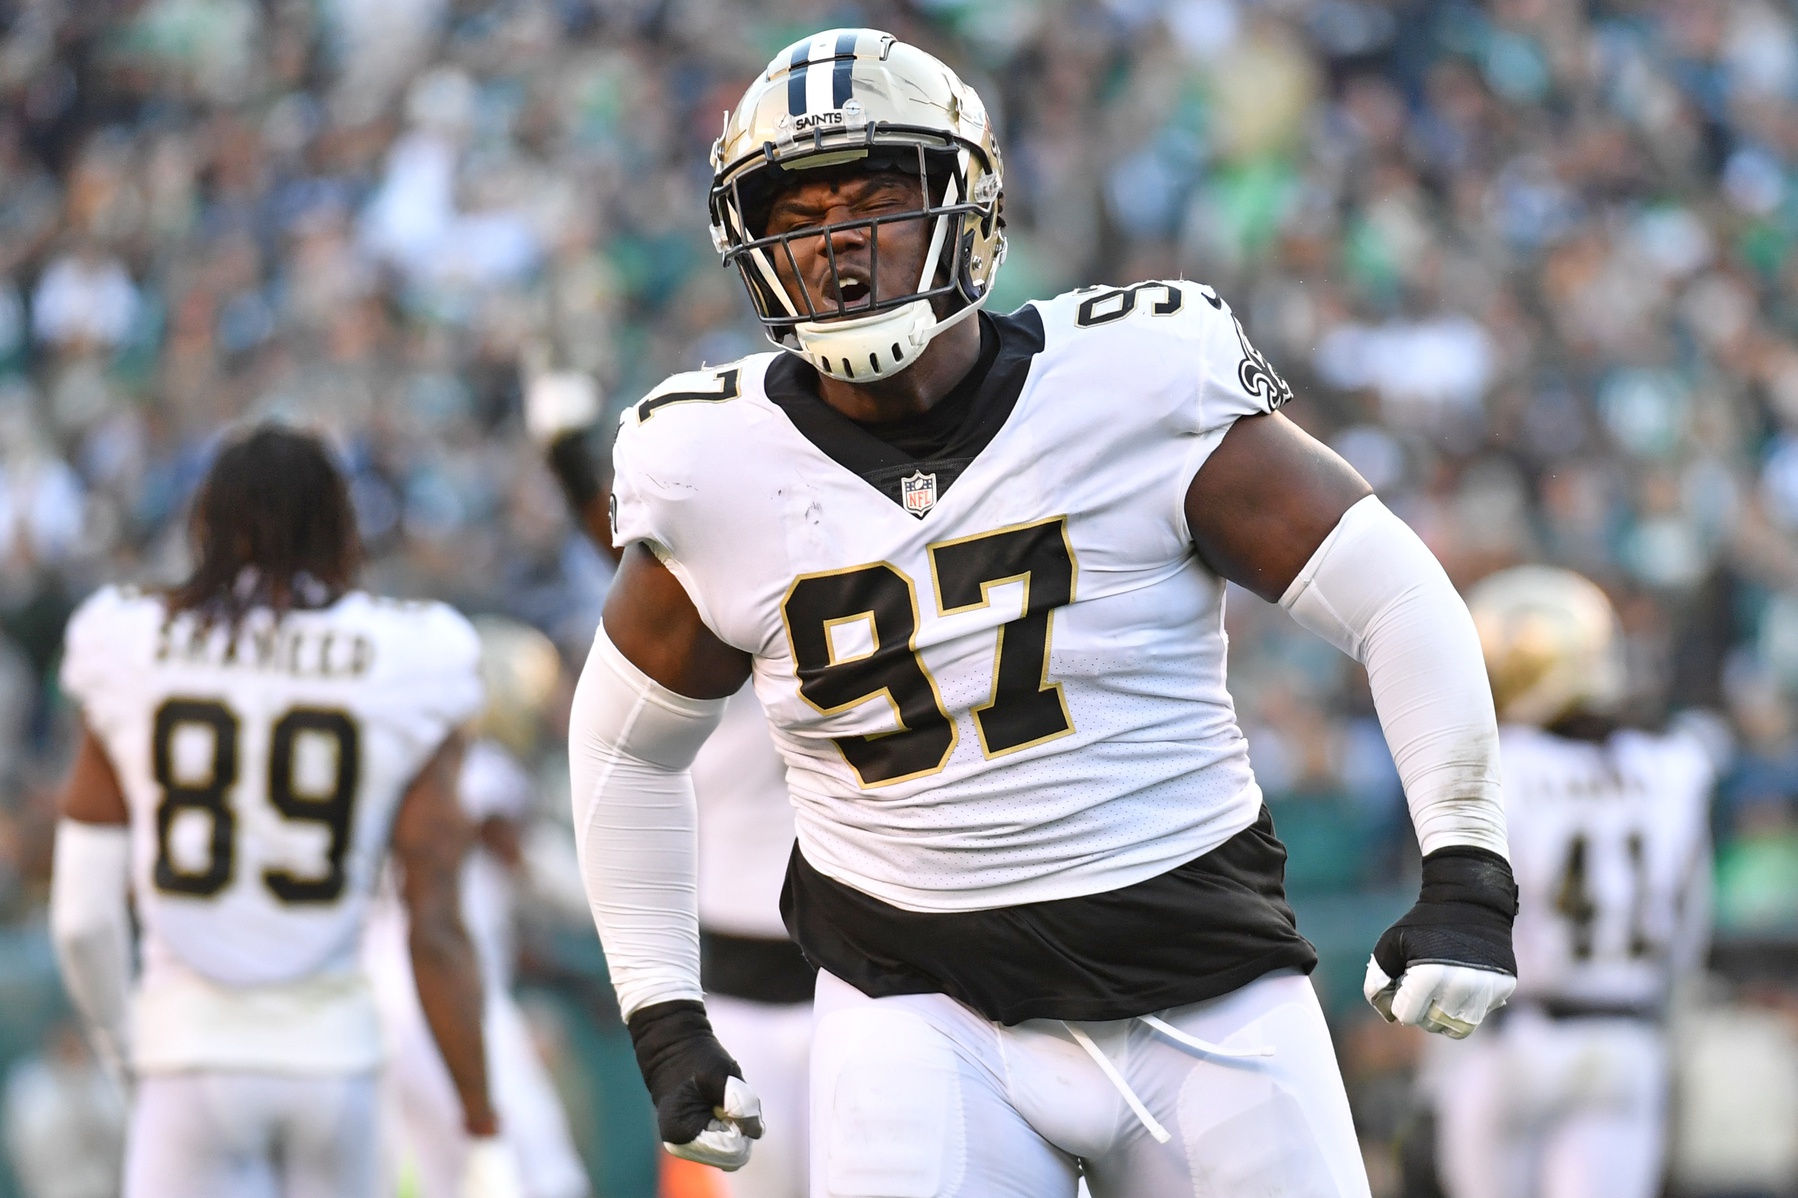 New Orleans Saints defensive end Malcolm Roach (97) celebrate a stop on fourth down during the fourth quarter against the Philadelphia Eagles at Lincoln Financial Field.